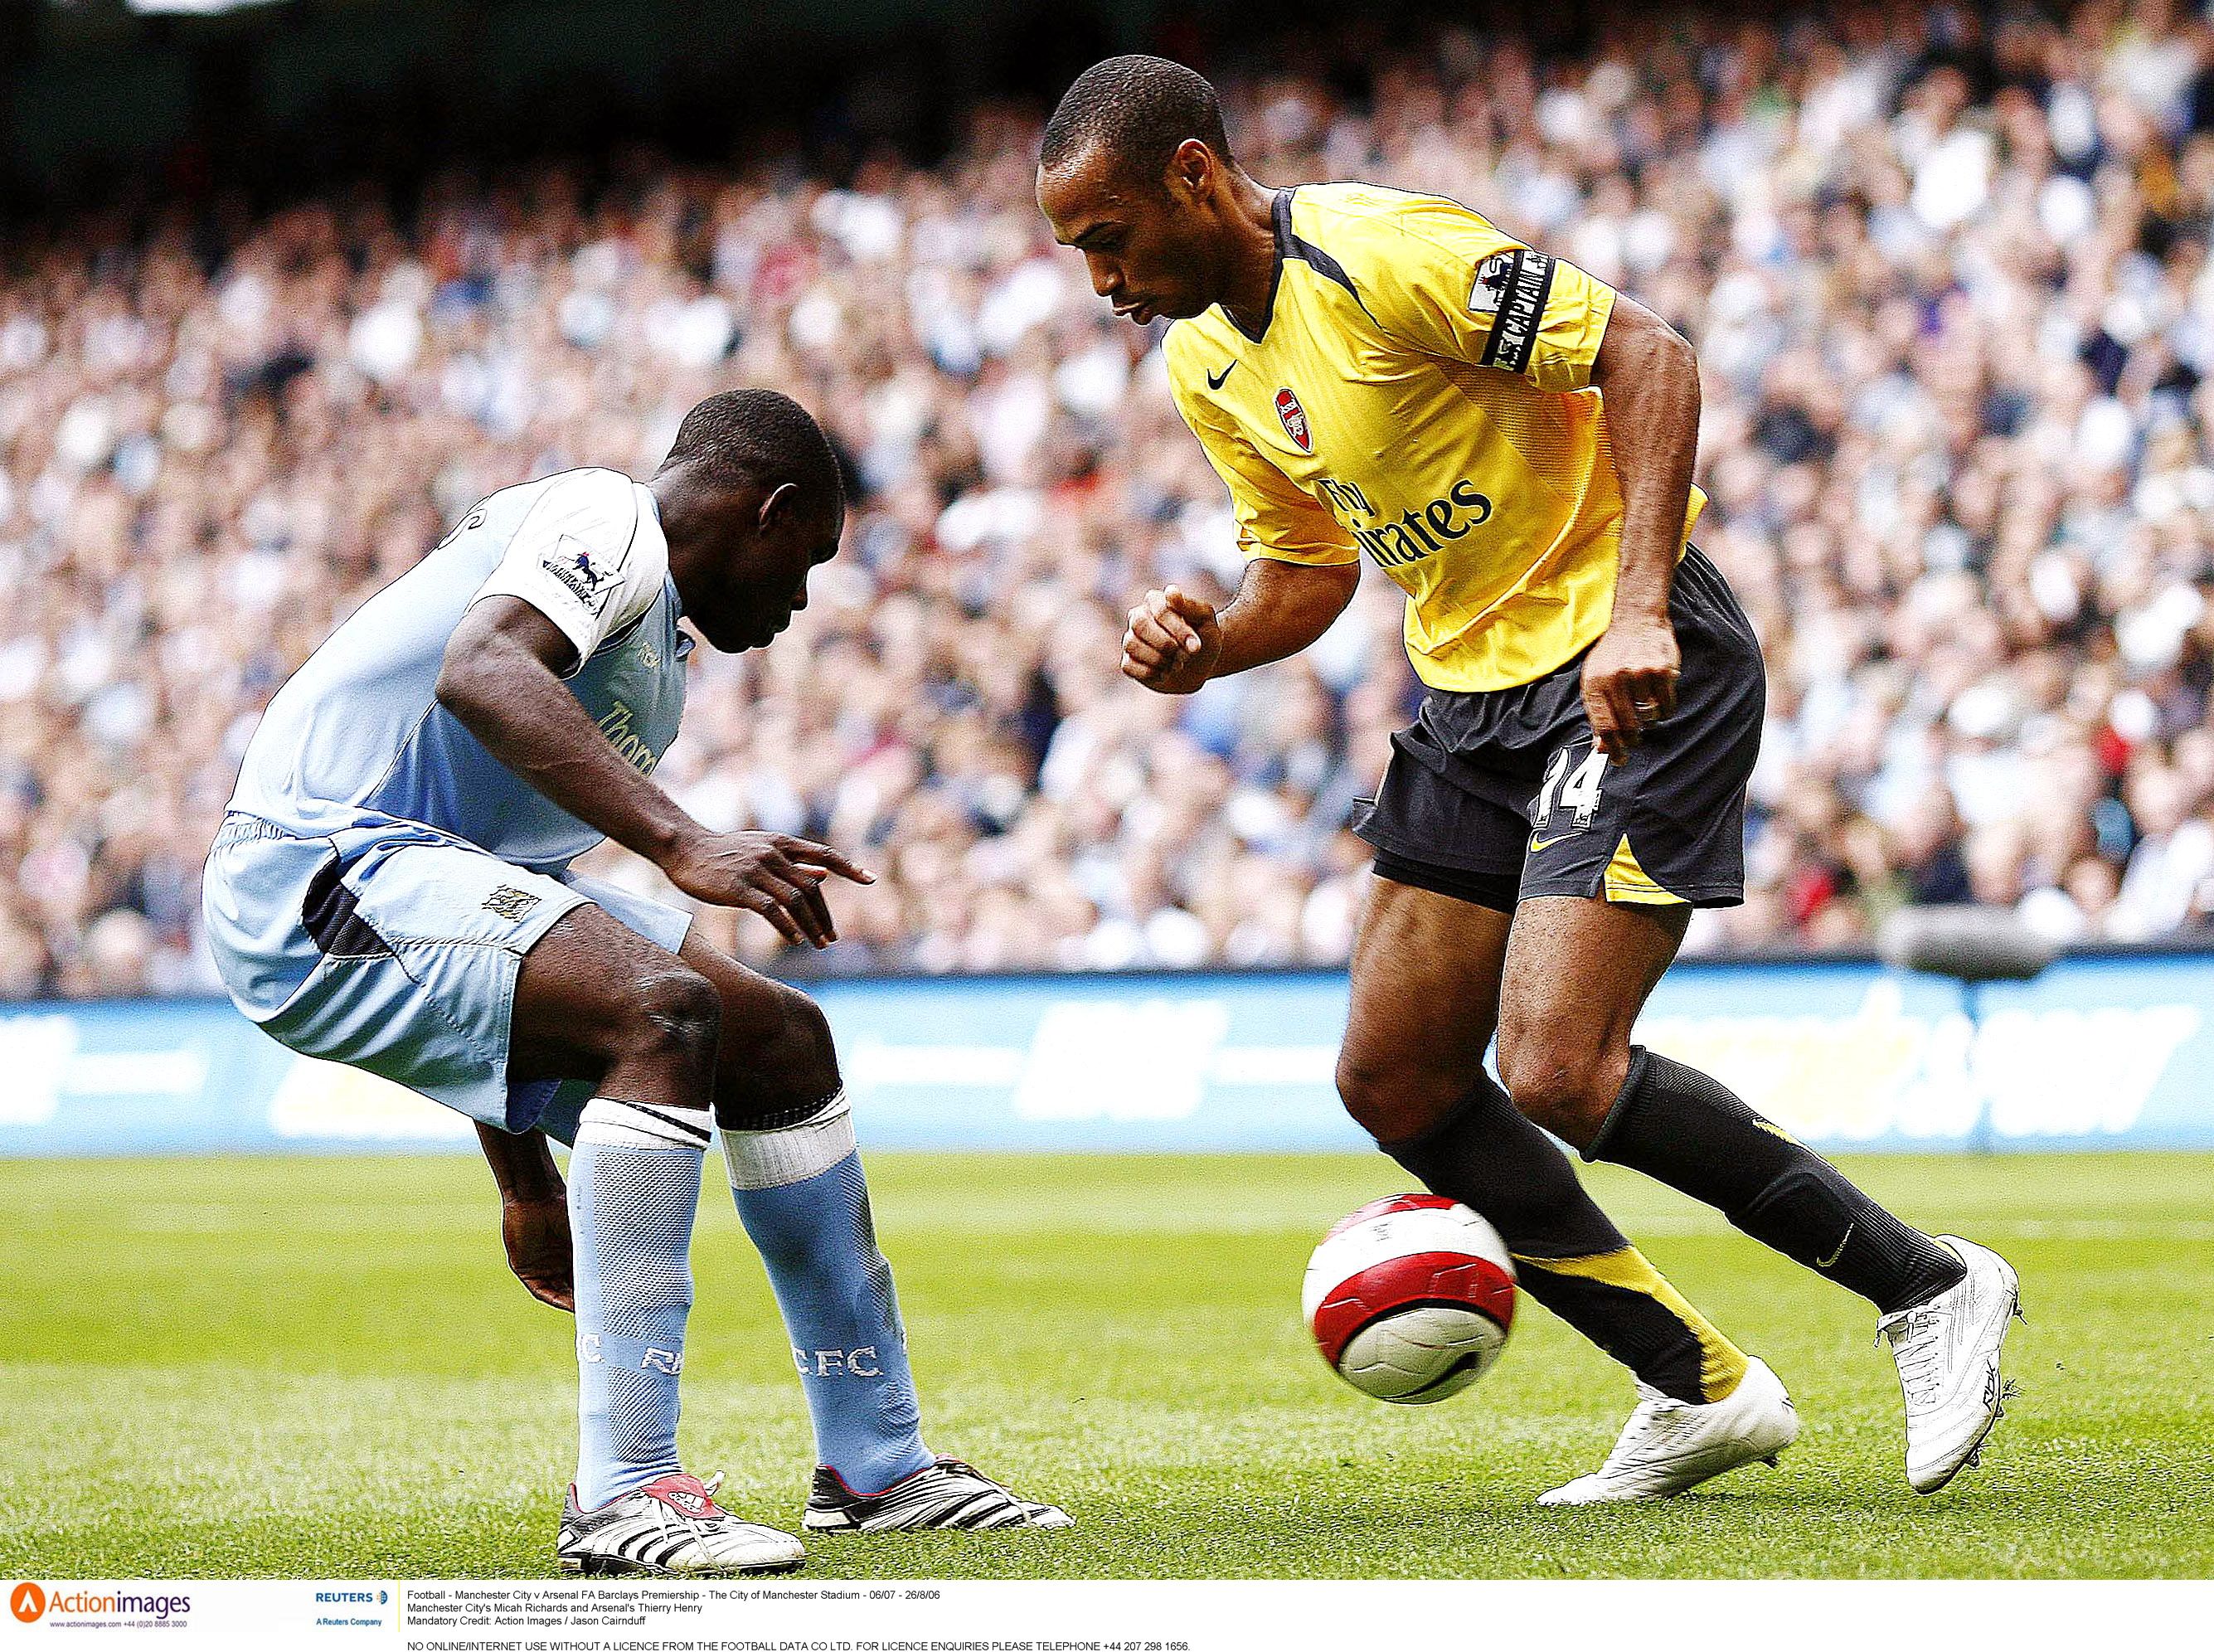 Thierry Henry and Micah Richards in action during Manchester City vs Arsenal in 2006